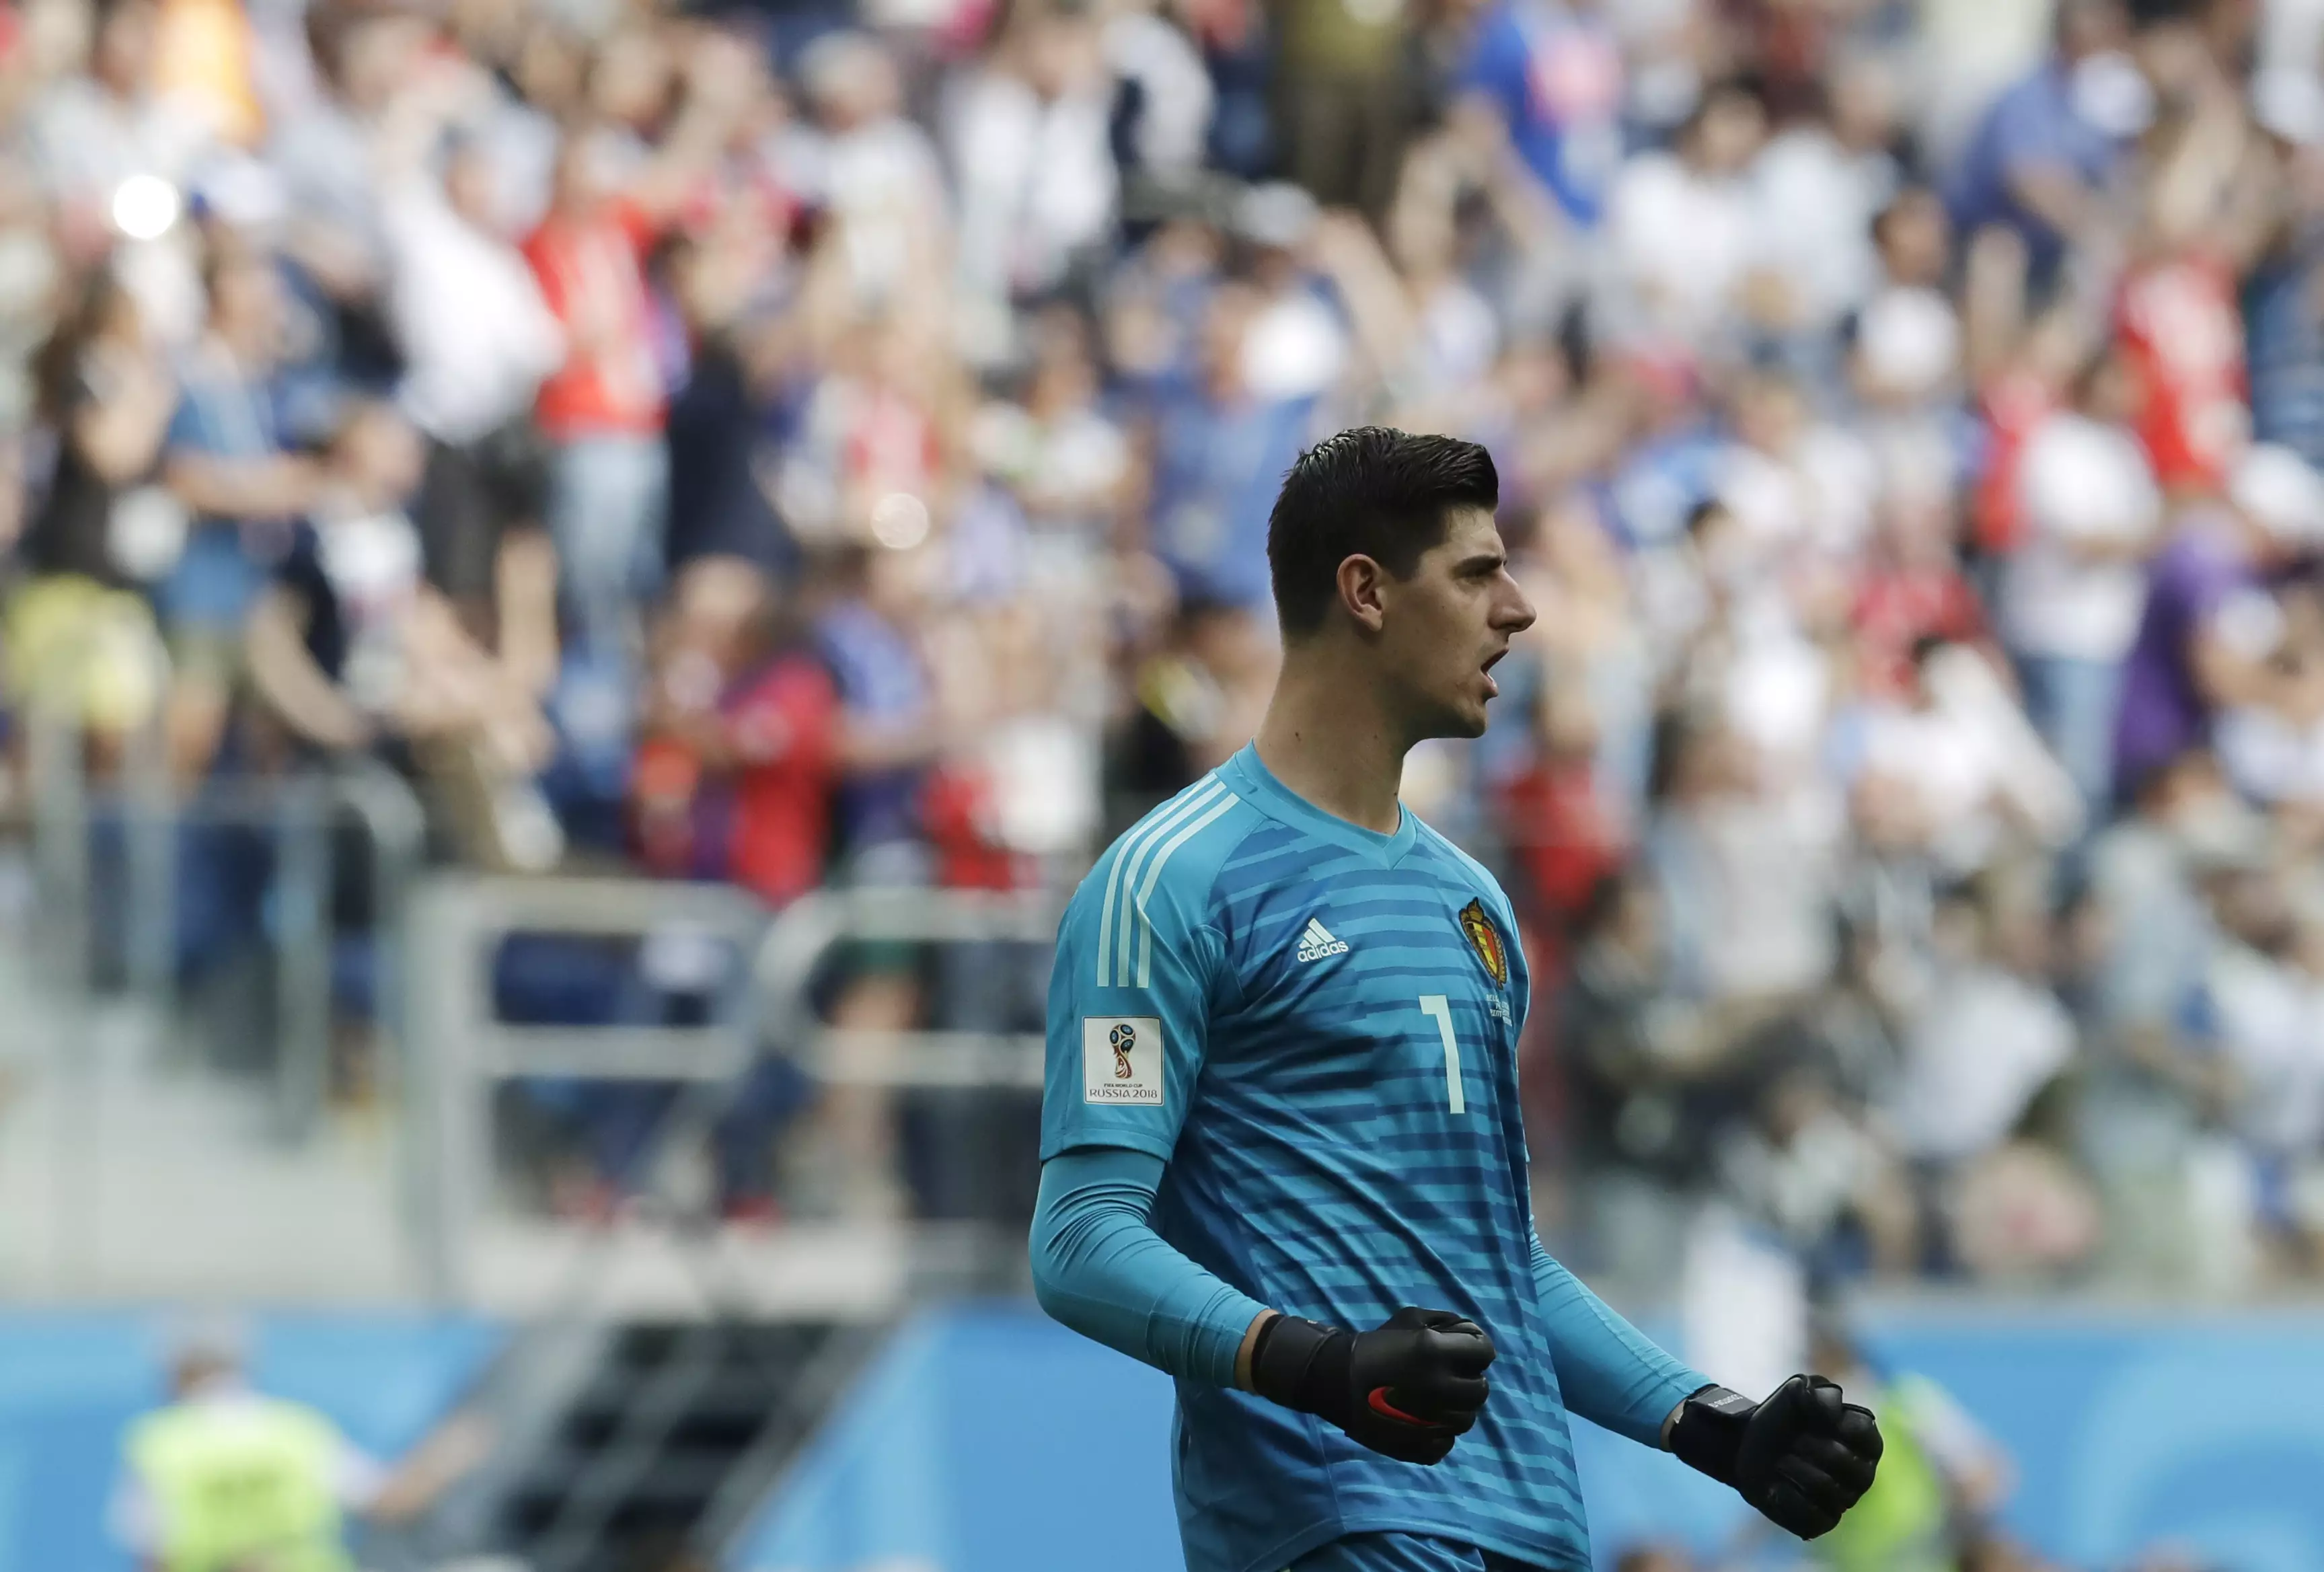 Will Courtois move to Real? Image: PA Images